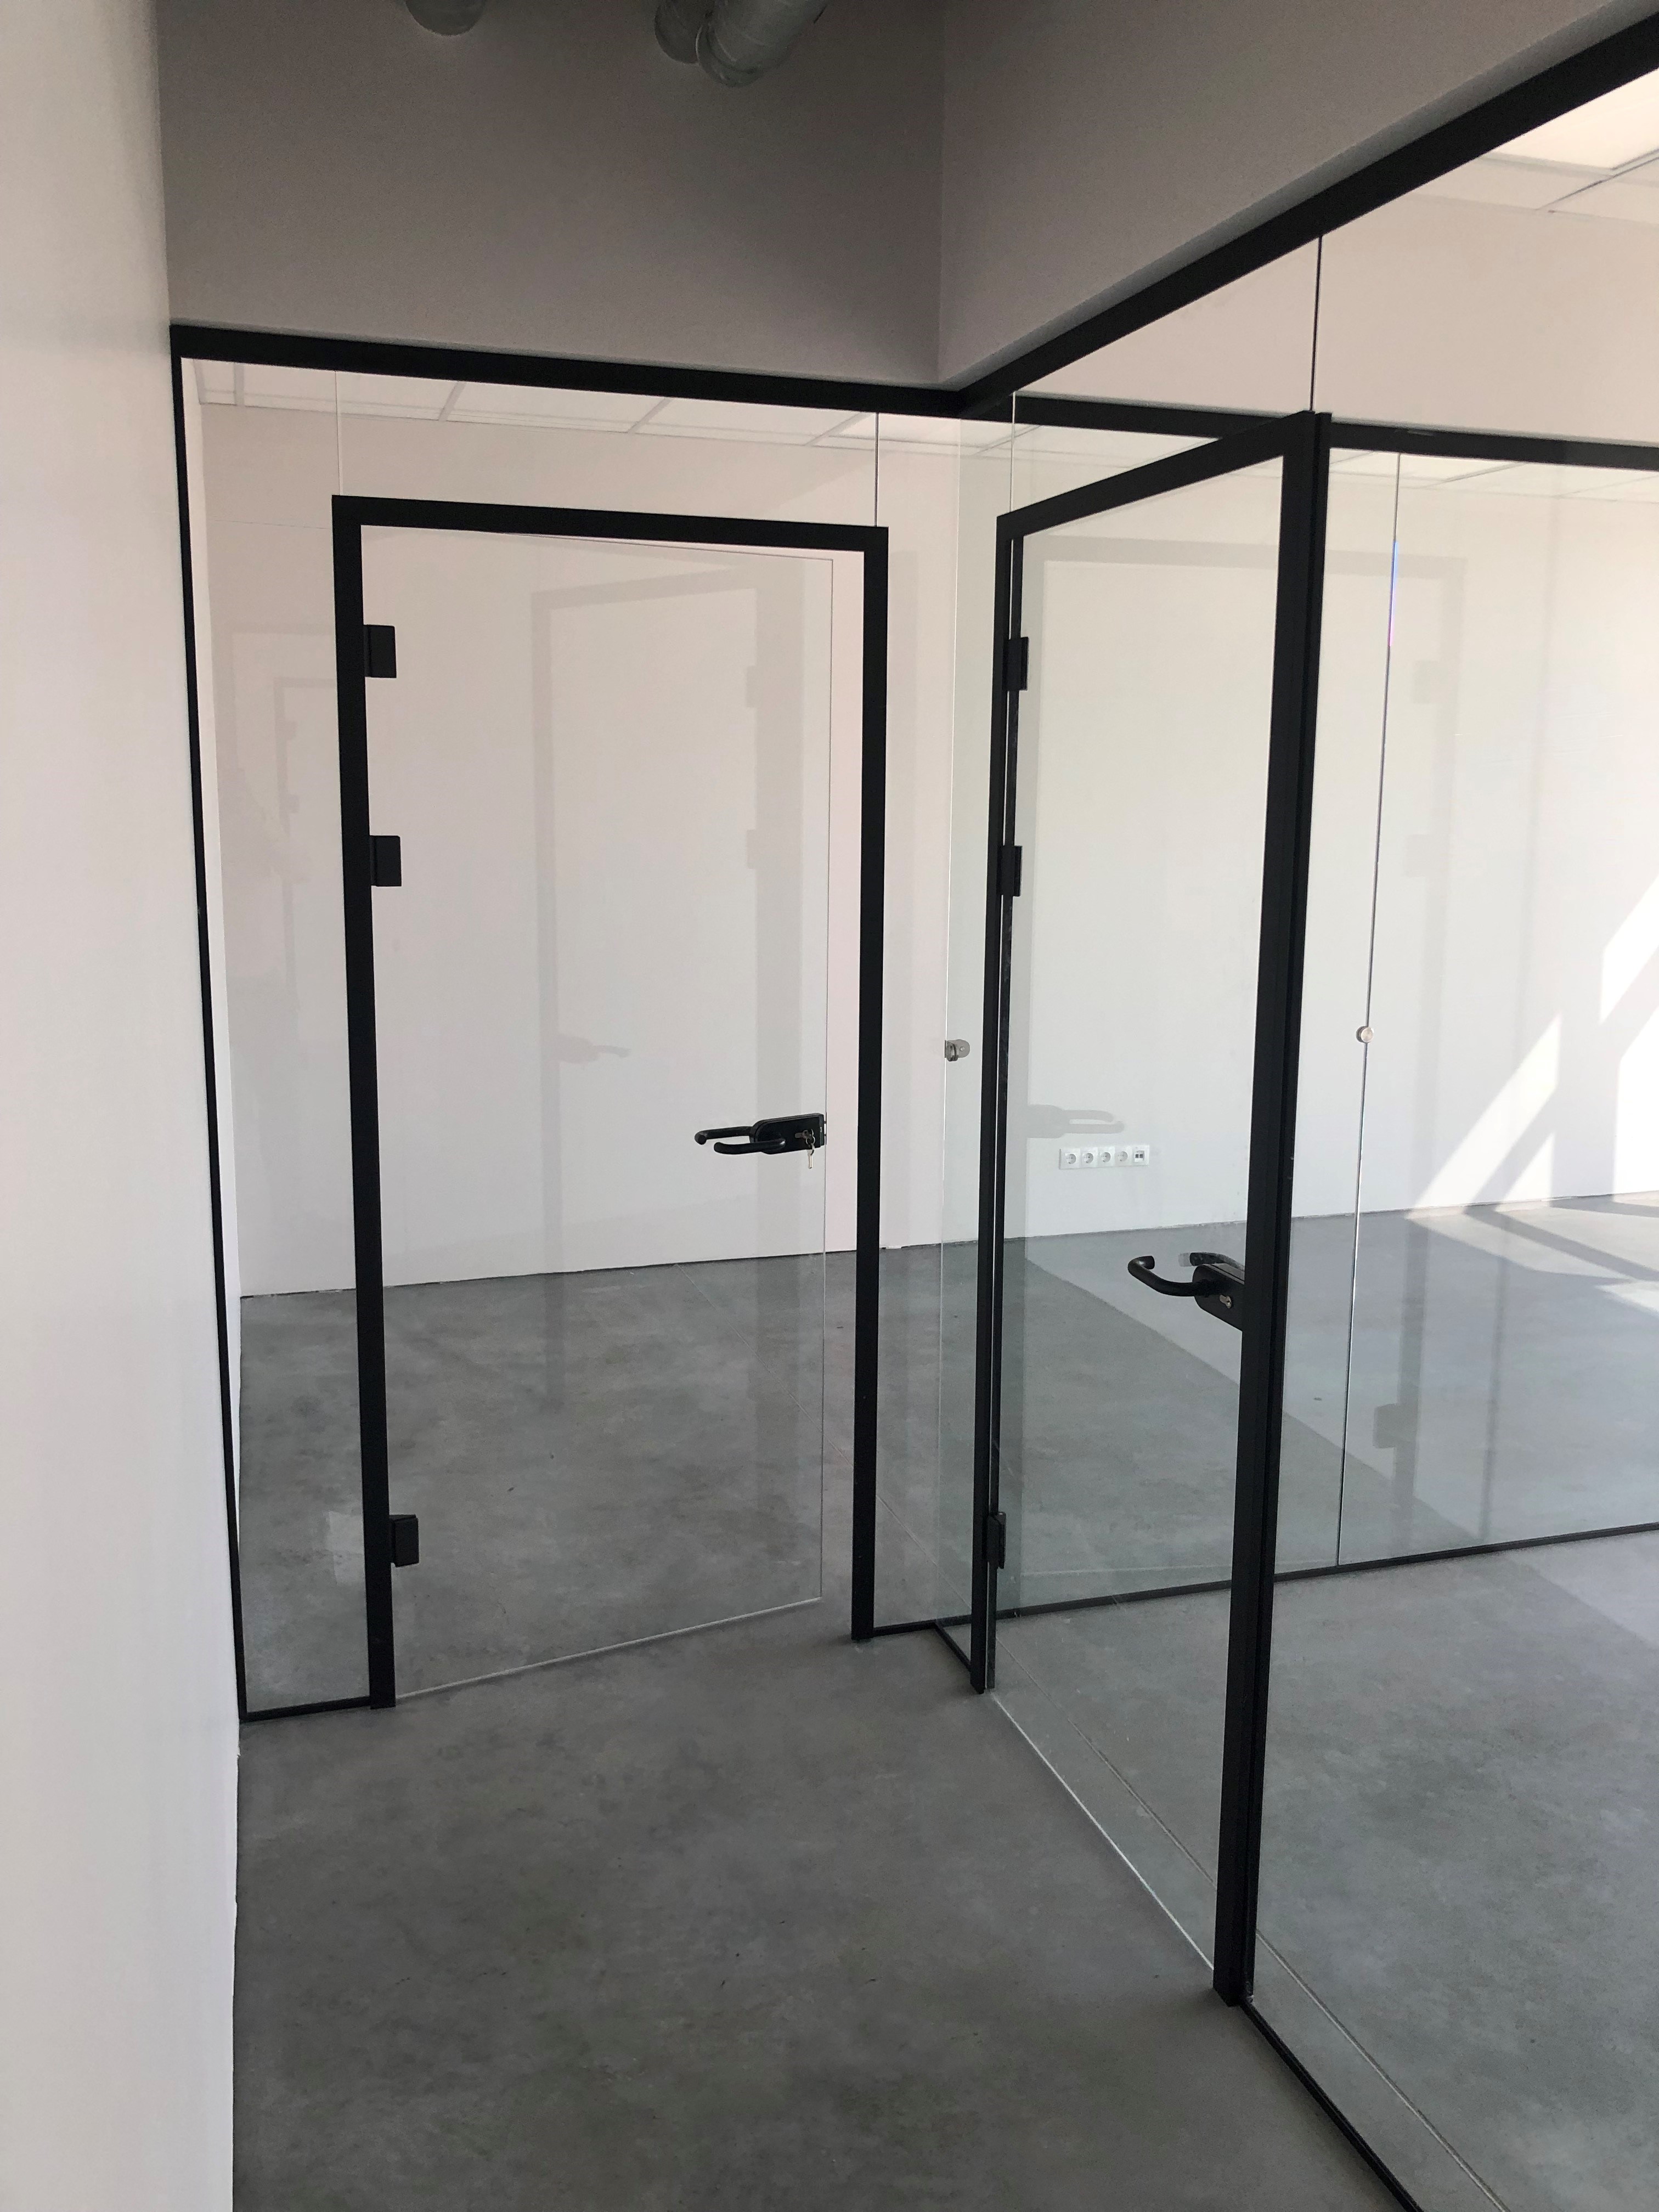 Frameless partitions